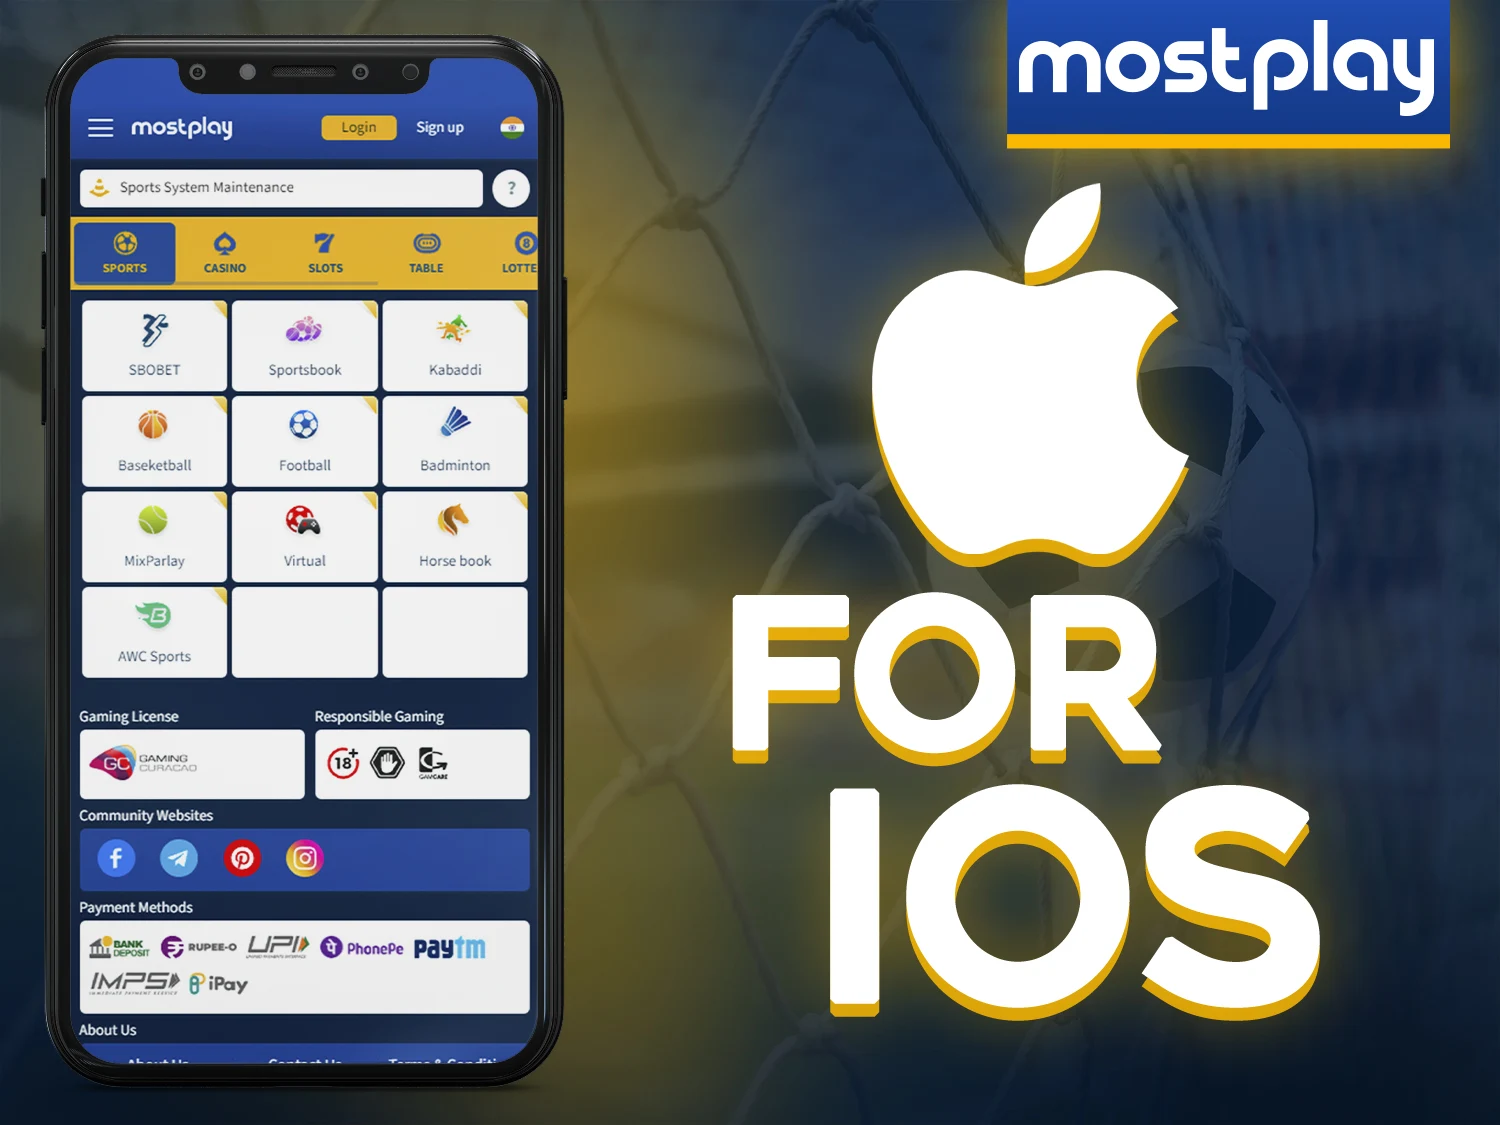 Install the Mostplay app on your iOS device.